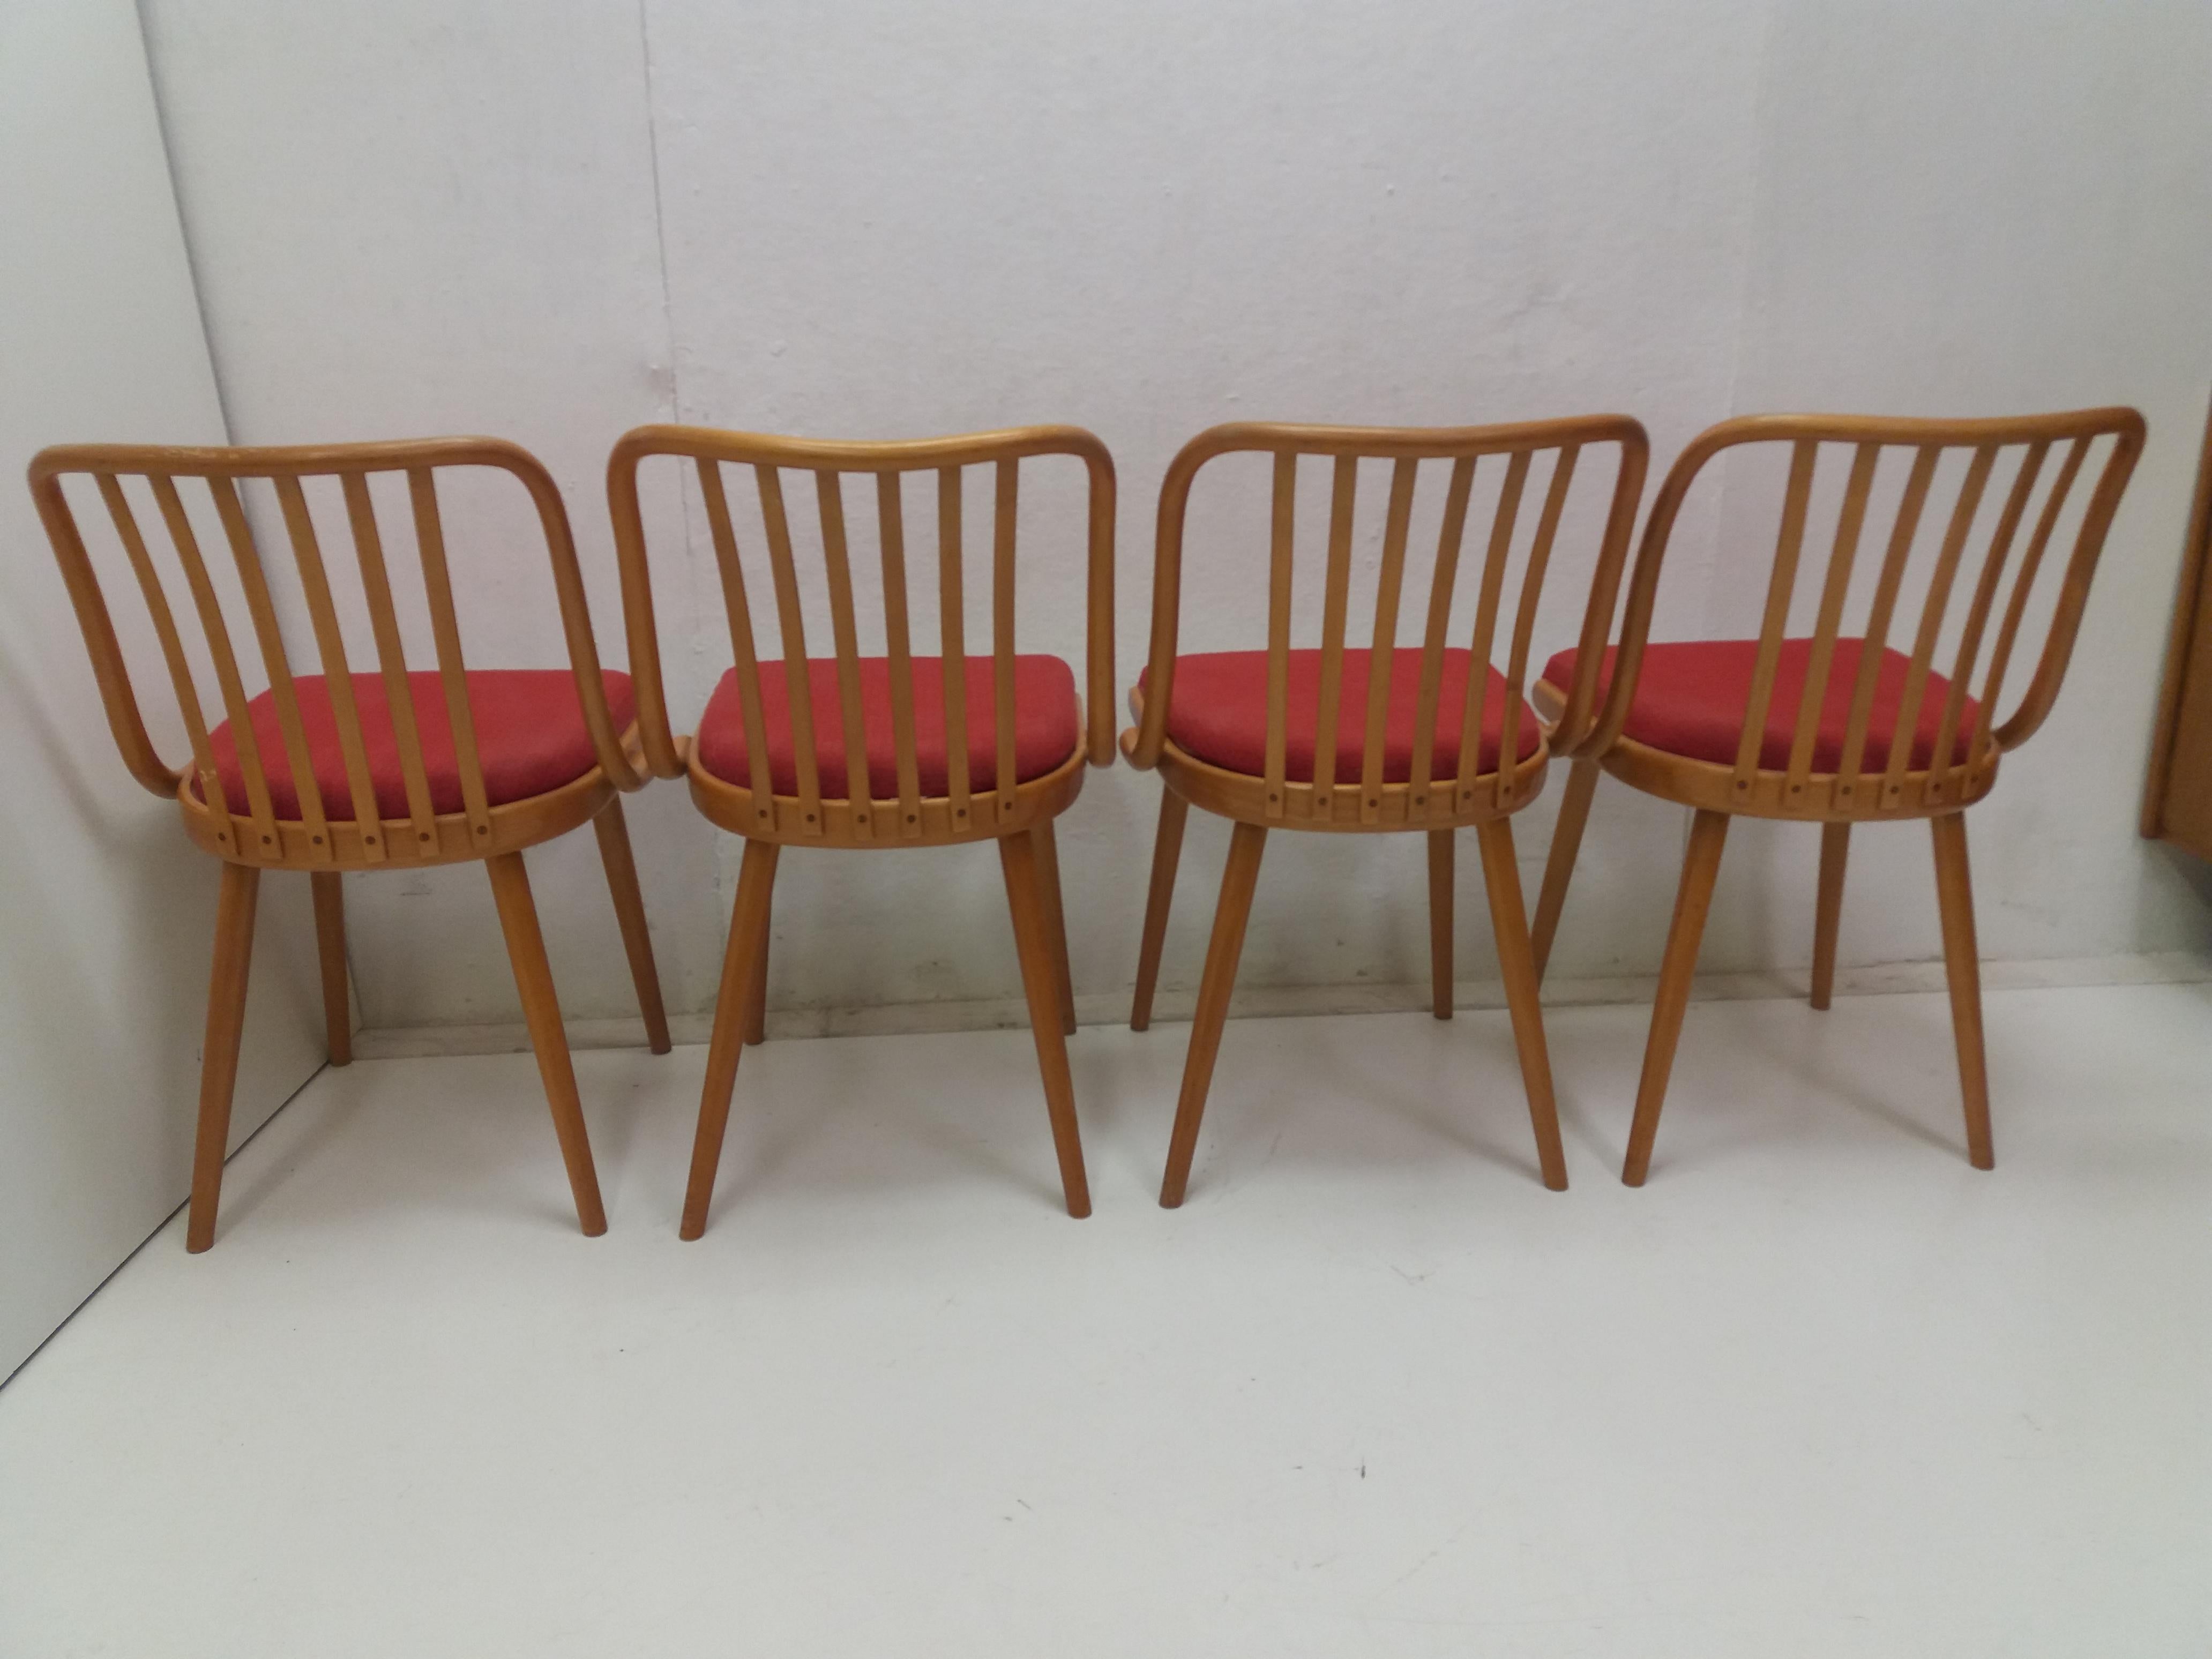 1960 Set of 4 Retro Suman Chairs and Table, Czechoslovakia For Sale 8